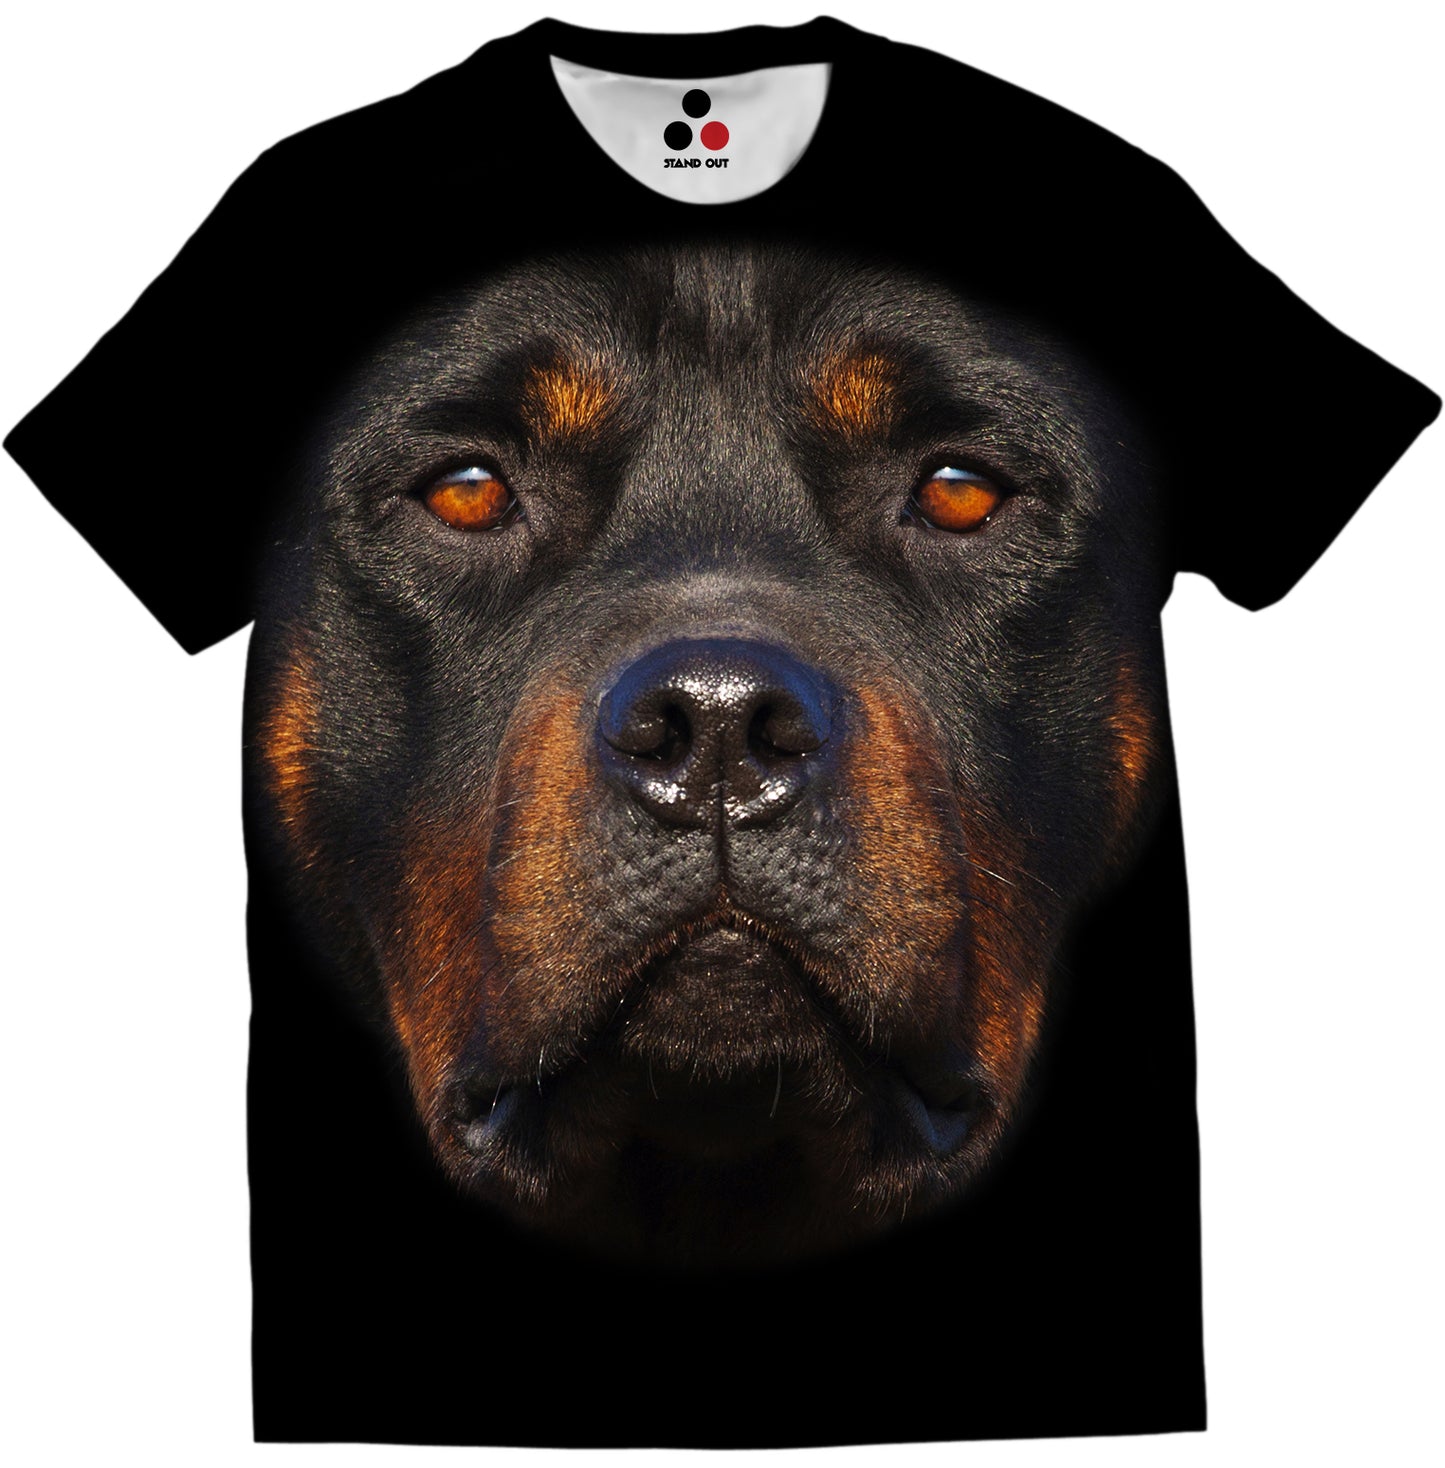 standout rottweiler t shirt all over print dog face t shirt redwolf souled store bewakoof osomwear dog show in india the kennel club of india dog t shirts for humans funny dog shirts dog graphic t shirts dogteeshop dog lover t shirt dog clothes online dog print t shirts india pet lover t shirt 3d animal print t shirts pet supply the mountain t shirt rottweiler t shirt